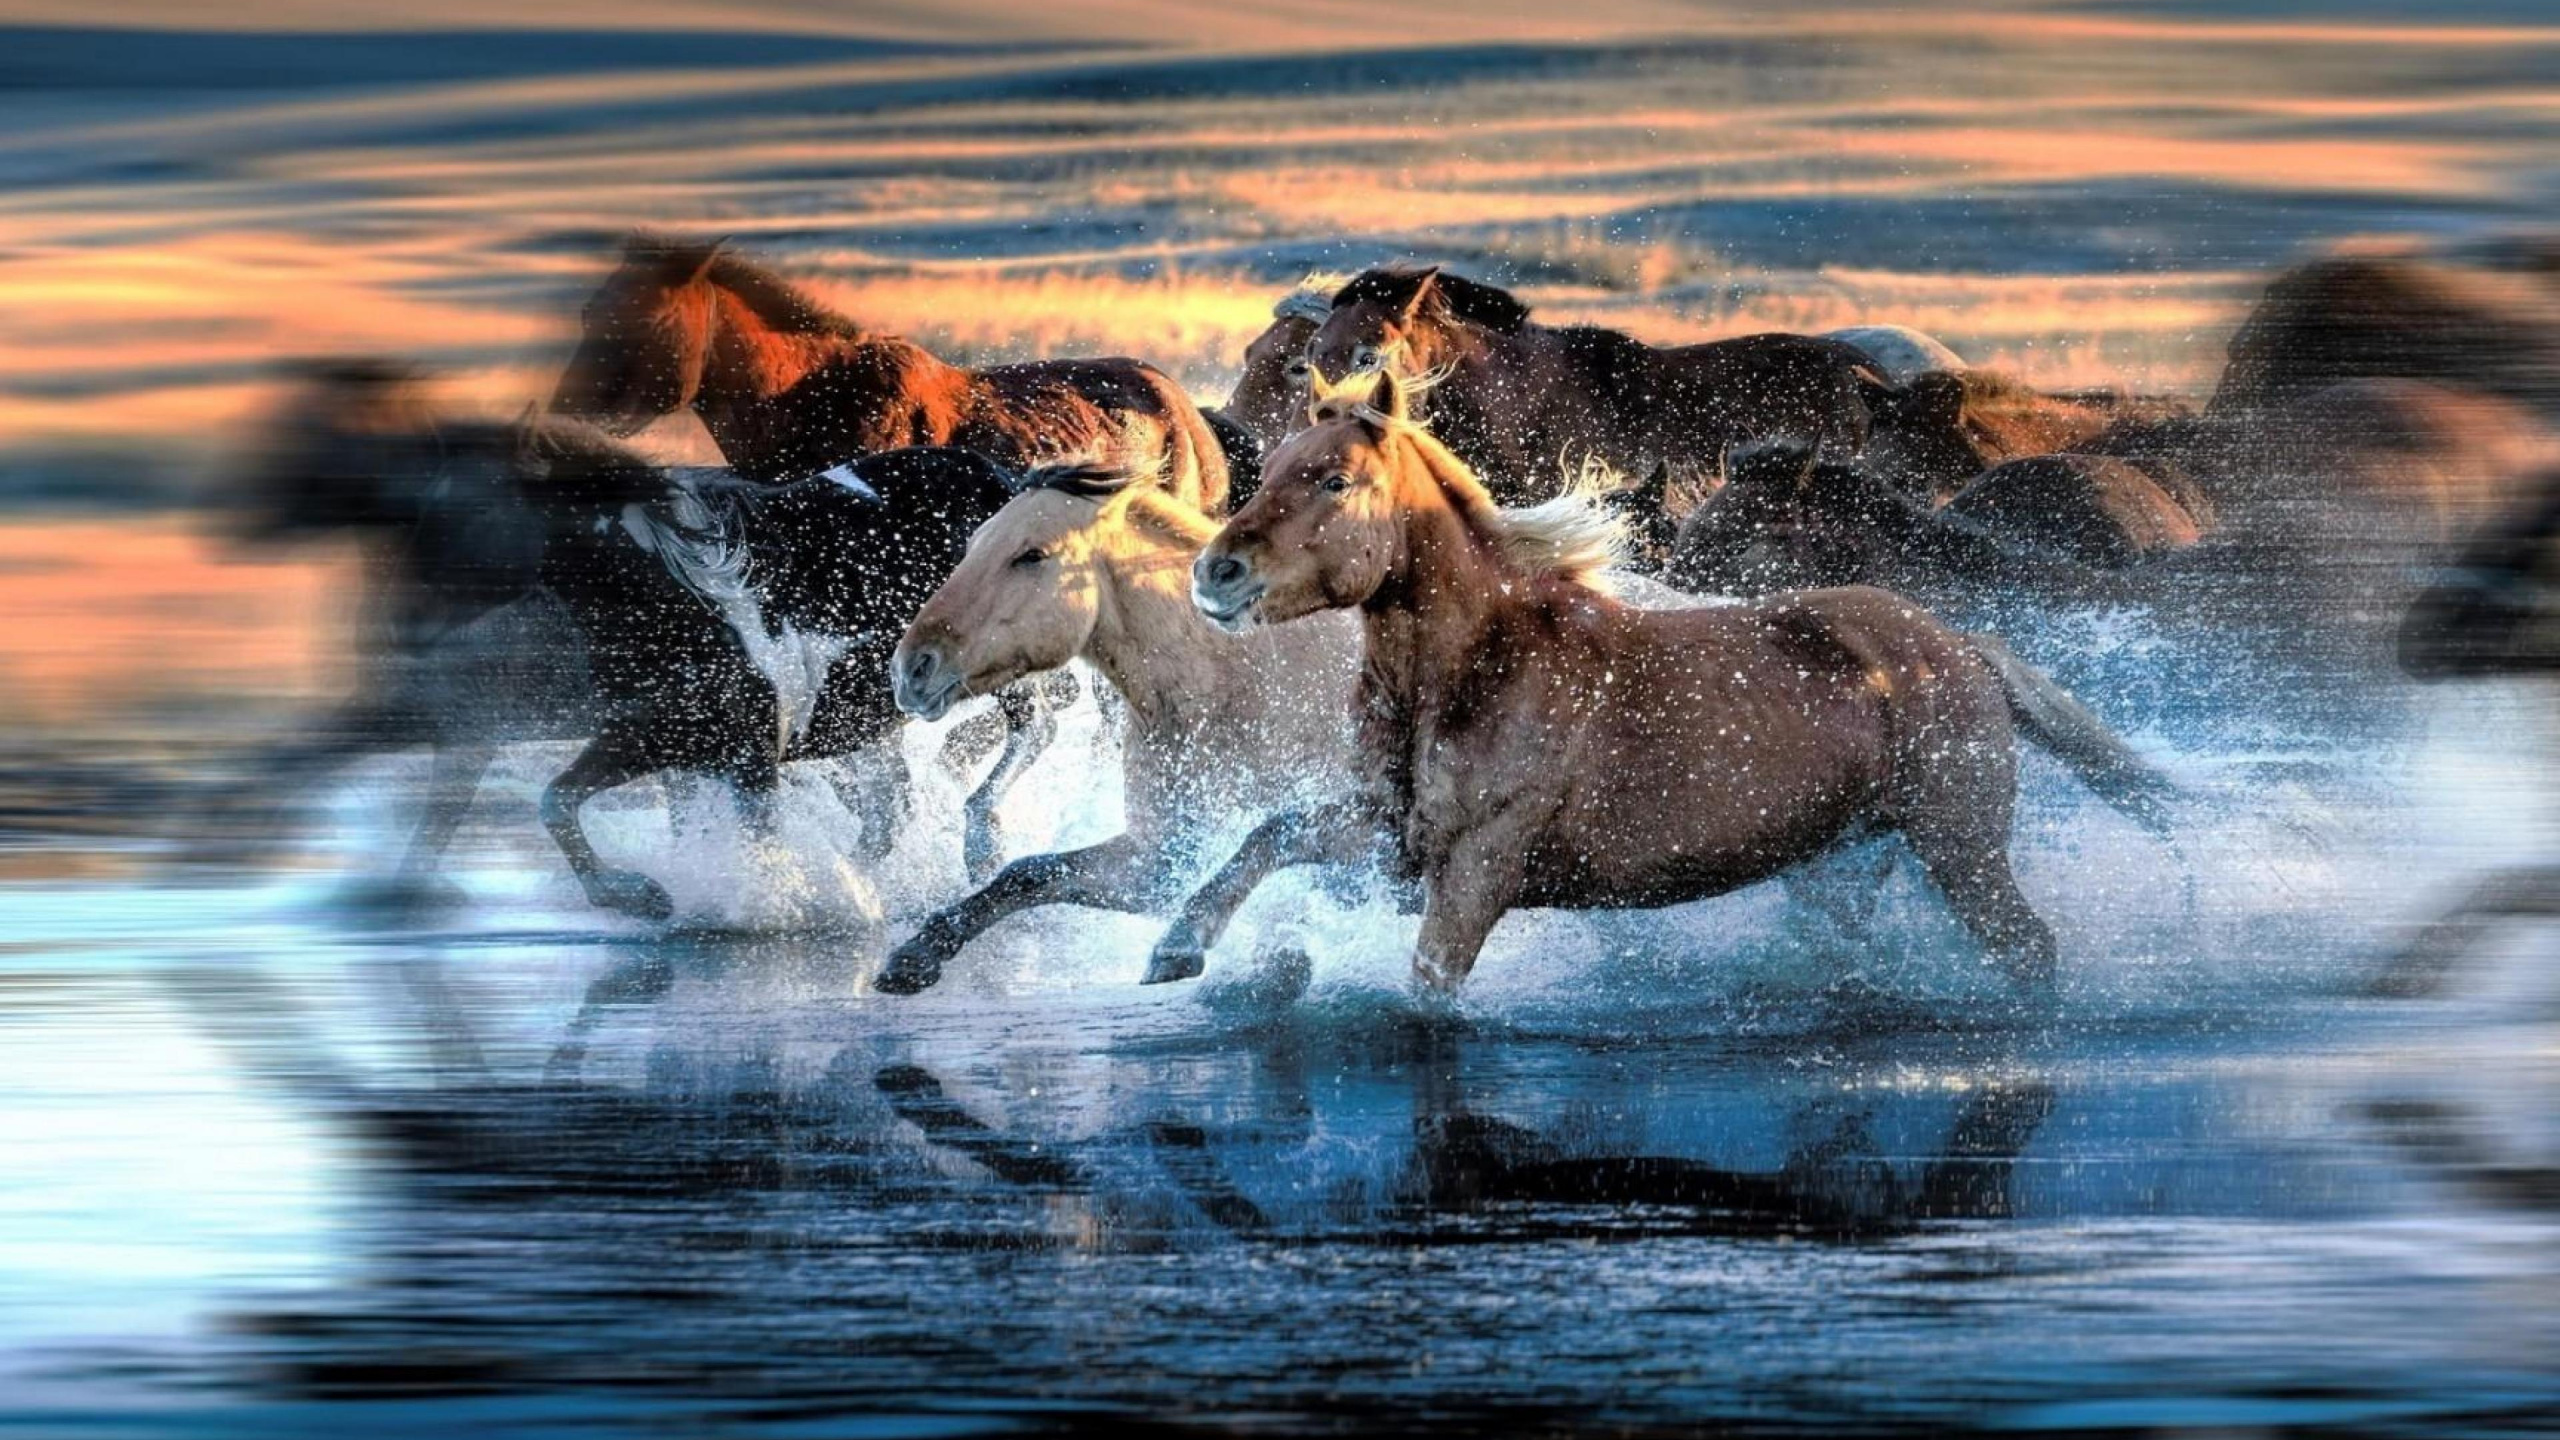 Brown and White Horse Running on Water During Daytime. Wallpaper in 2560x1440 Resolution